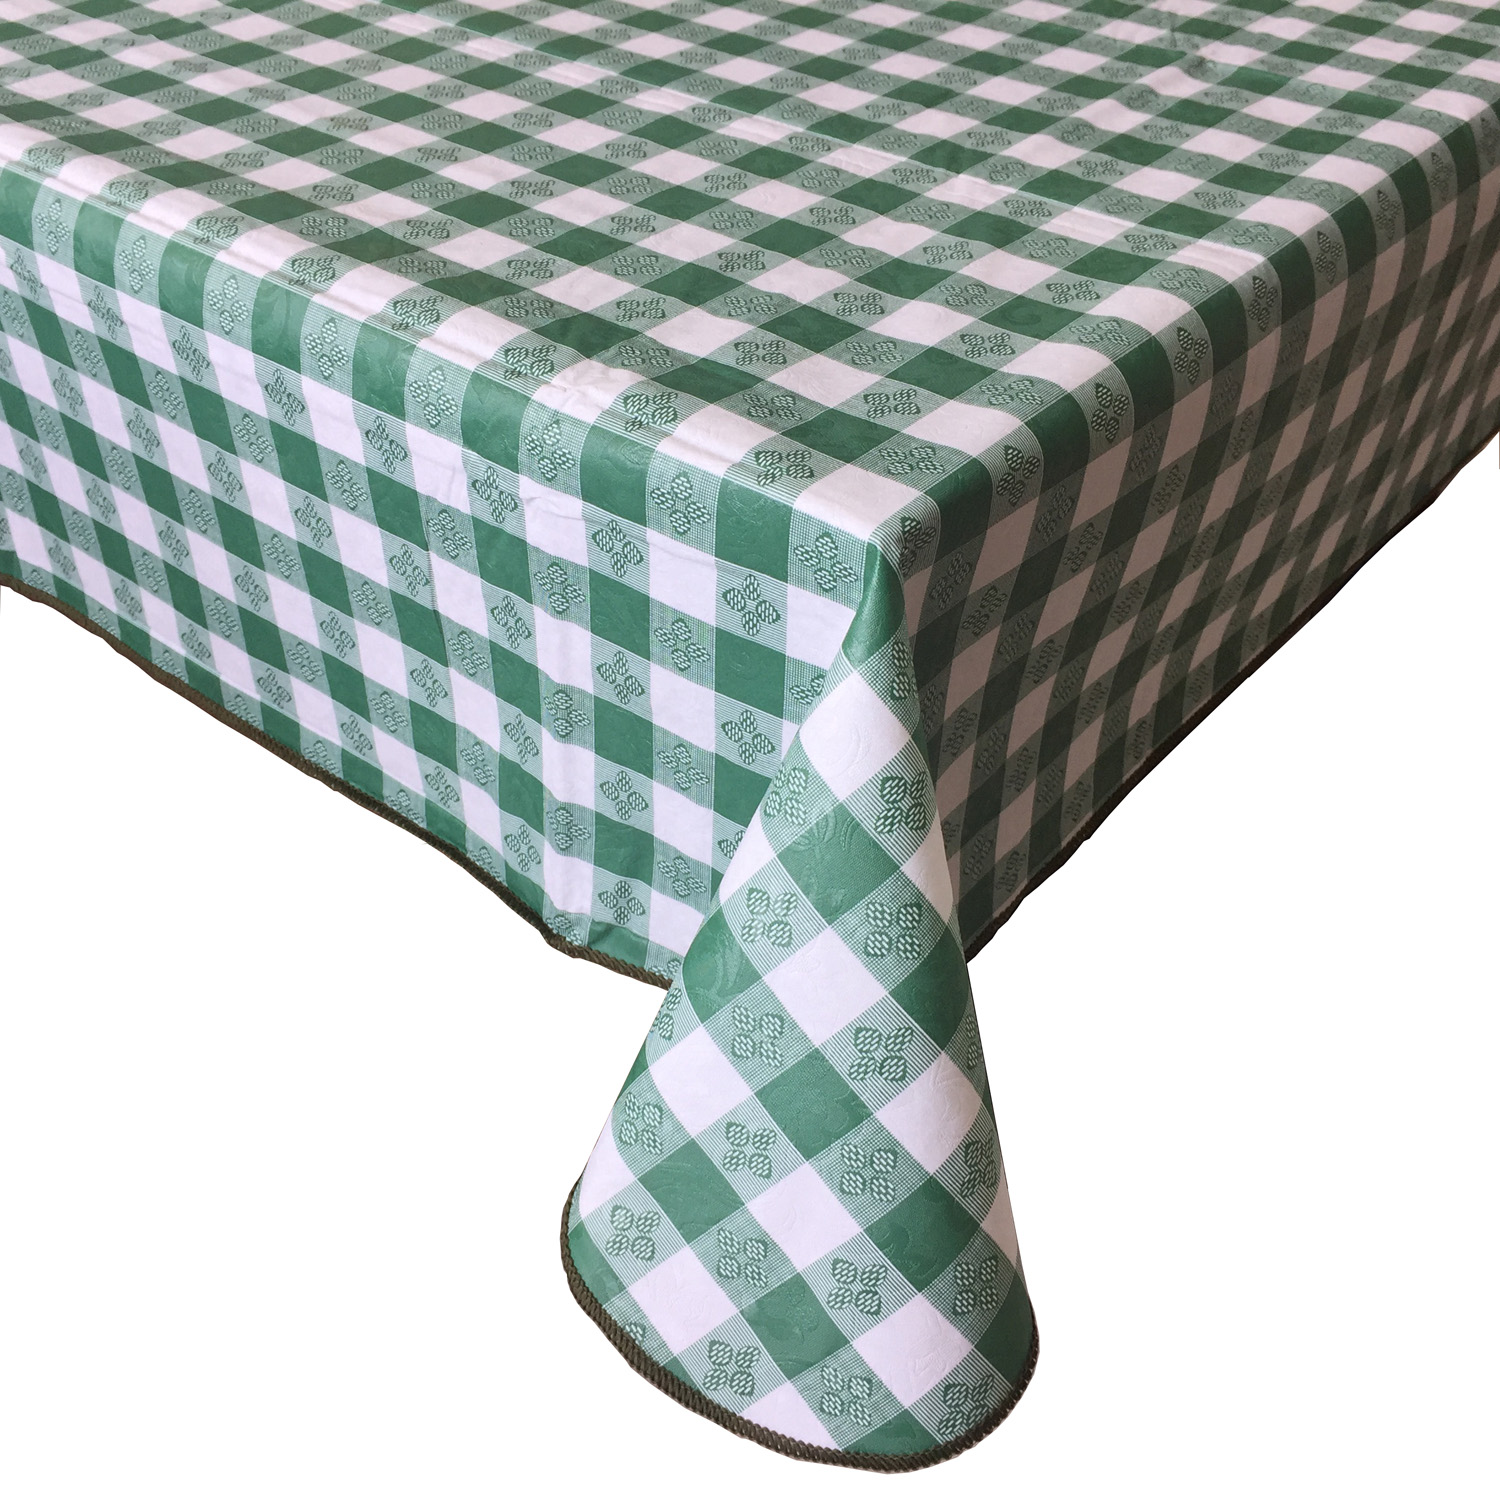 CAC China TCVG-7052G Green Vinyl Table Cover with Flannel Back 70" x 52"